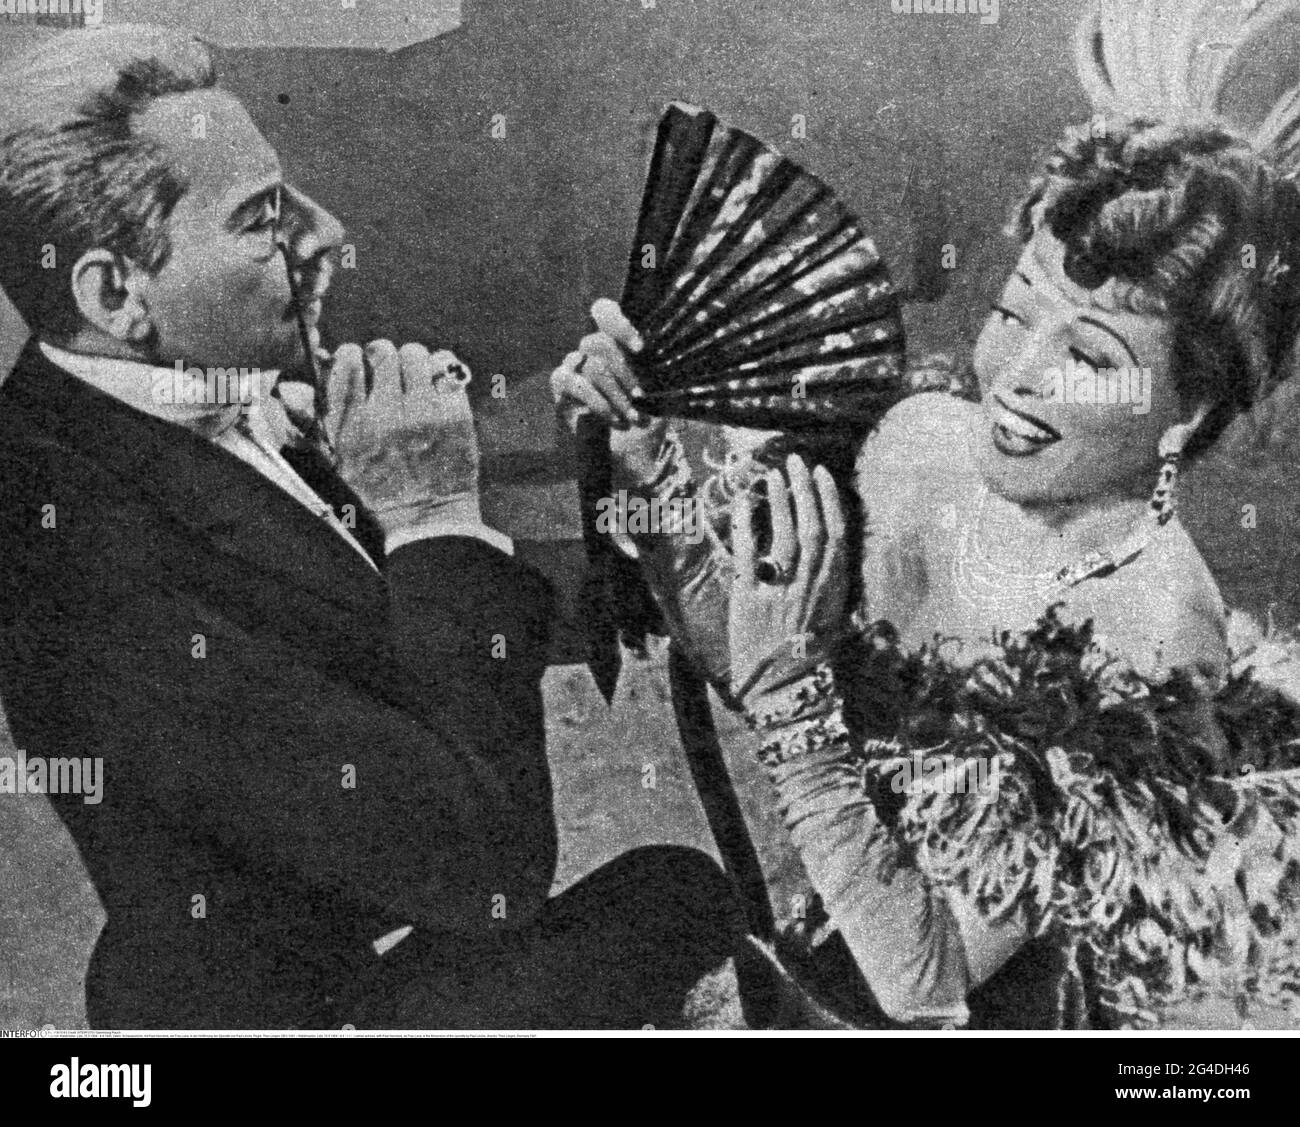 Waldmueller, Lizzi, 25.5.1904 - 8.4.1945, Austrian actress, with Paul Henckels,  as Frau Luna, ADDITIONAL-RIGHTS-CLEARANCE-INFO-NOT-AVAILABLE Stock Photo